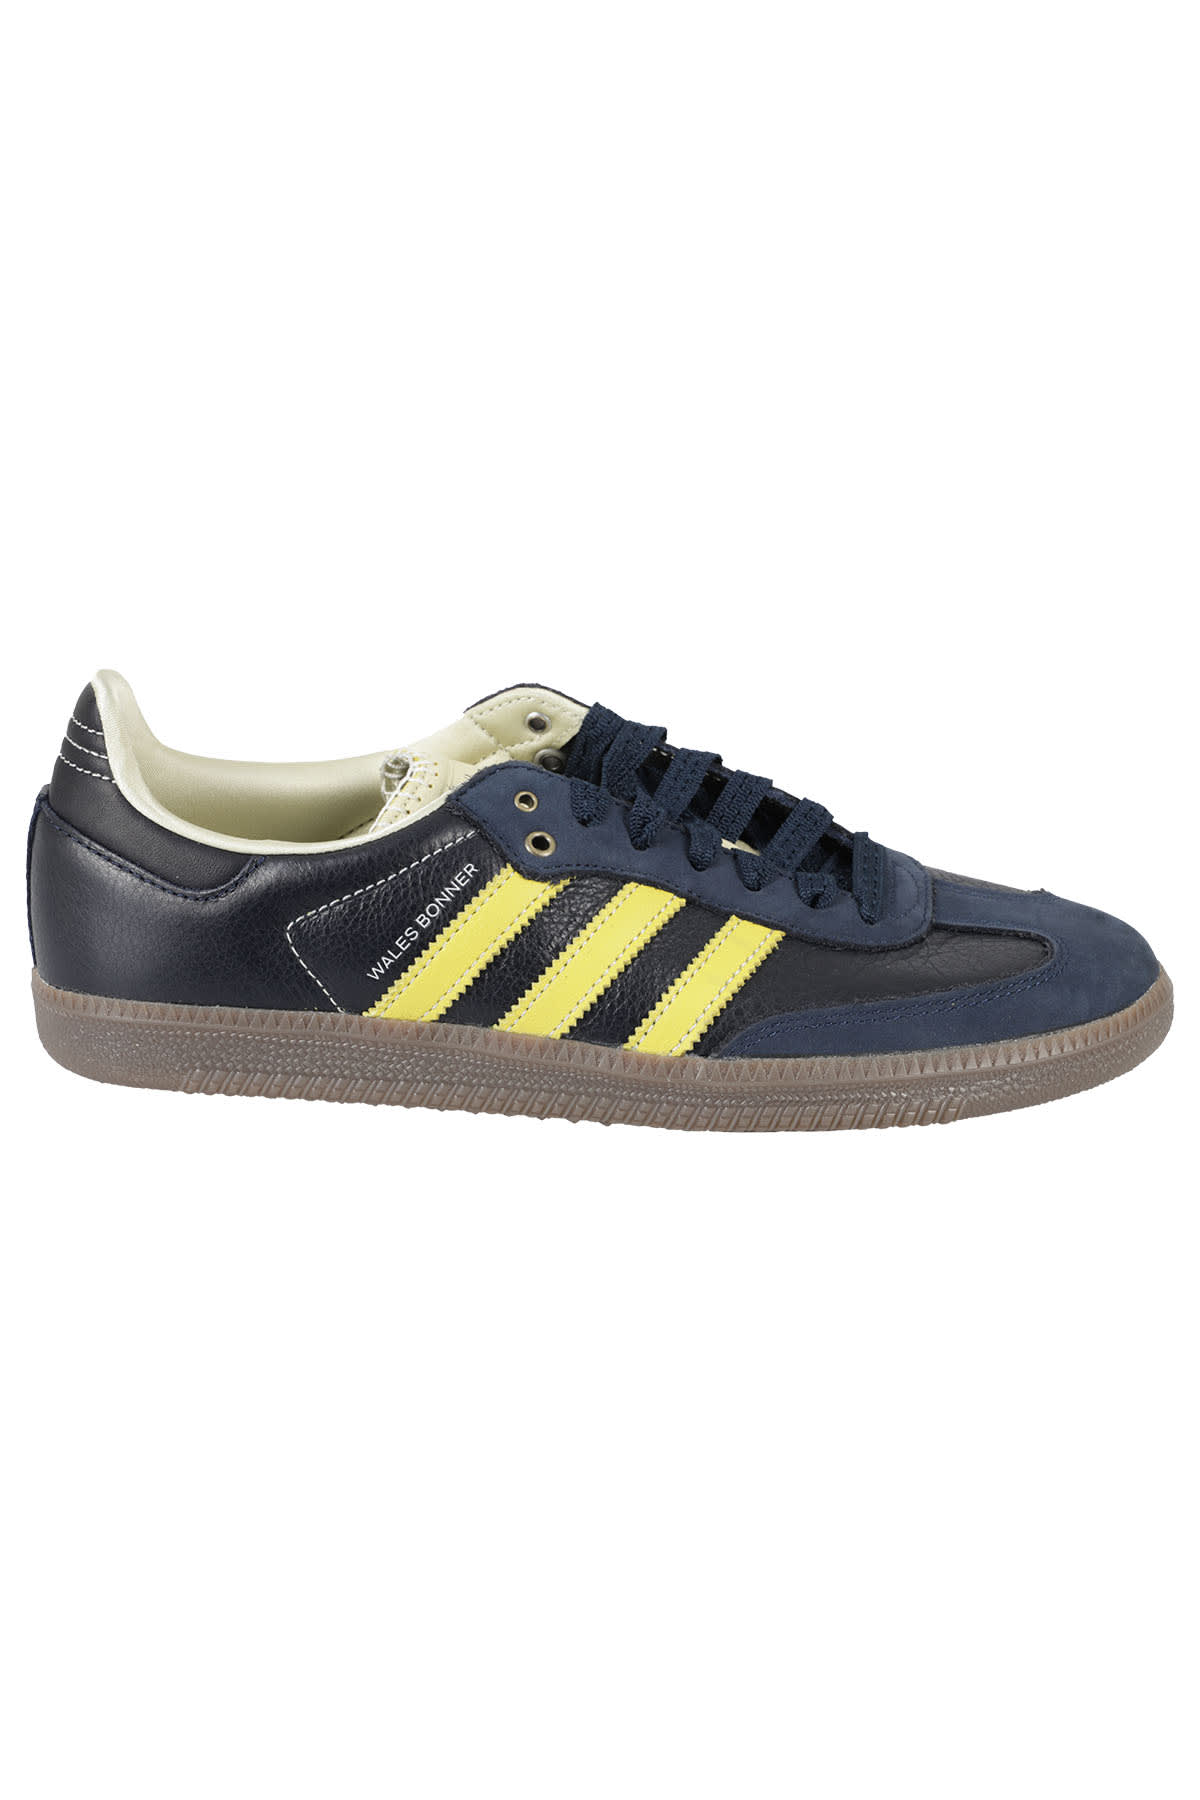 Adidas Originals By Wales Bonner Sneakers In Conavy White Yellow